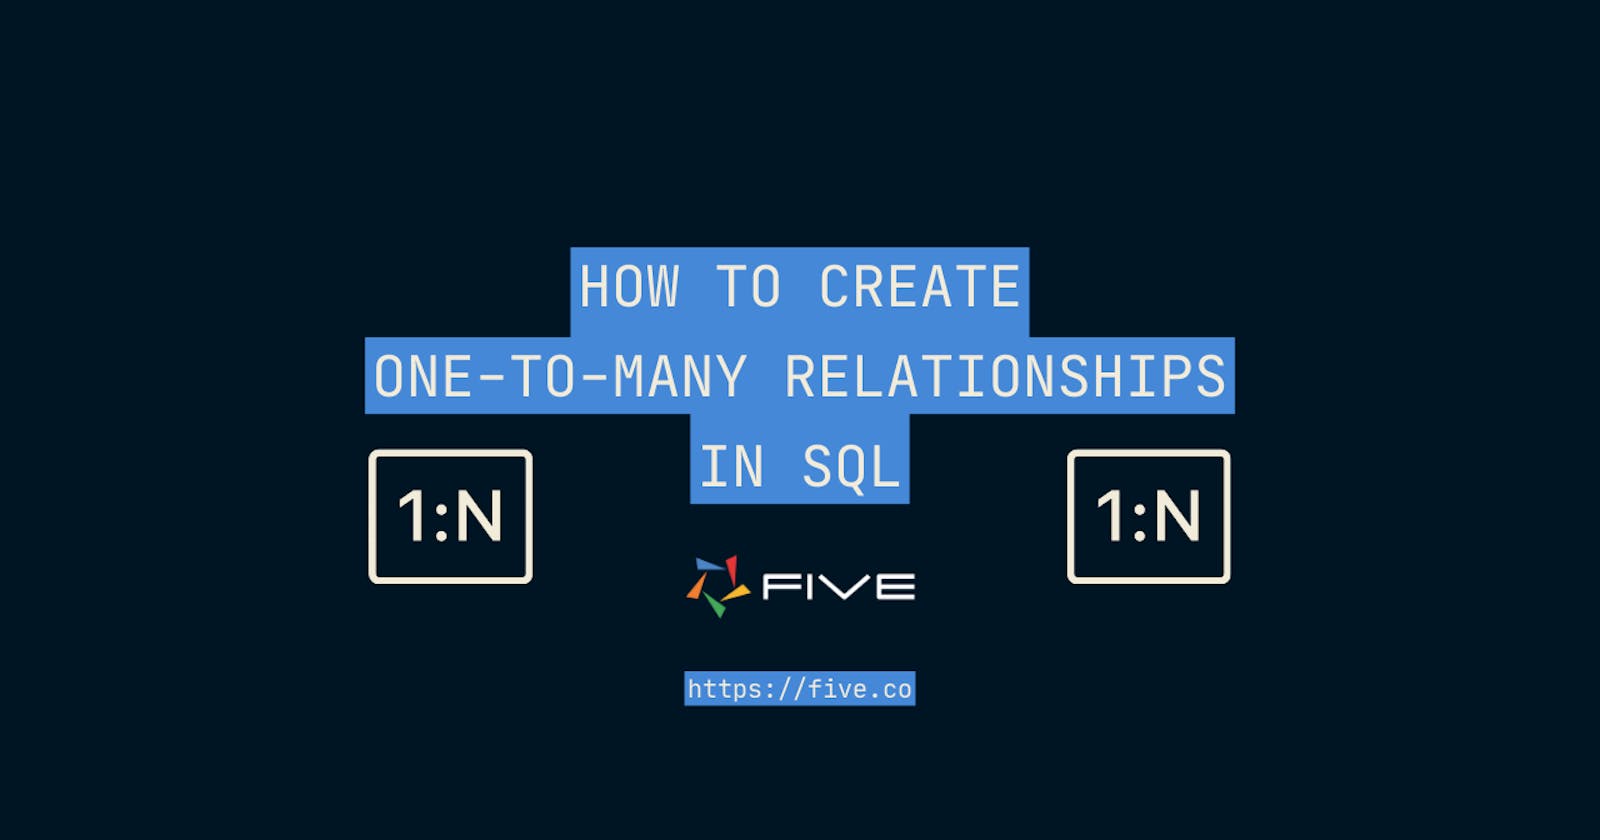 How To Create One-to-Many Relationships in SQL